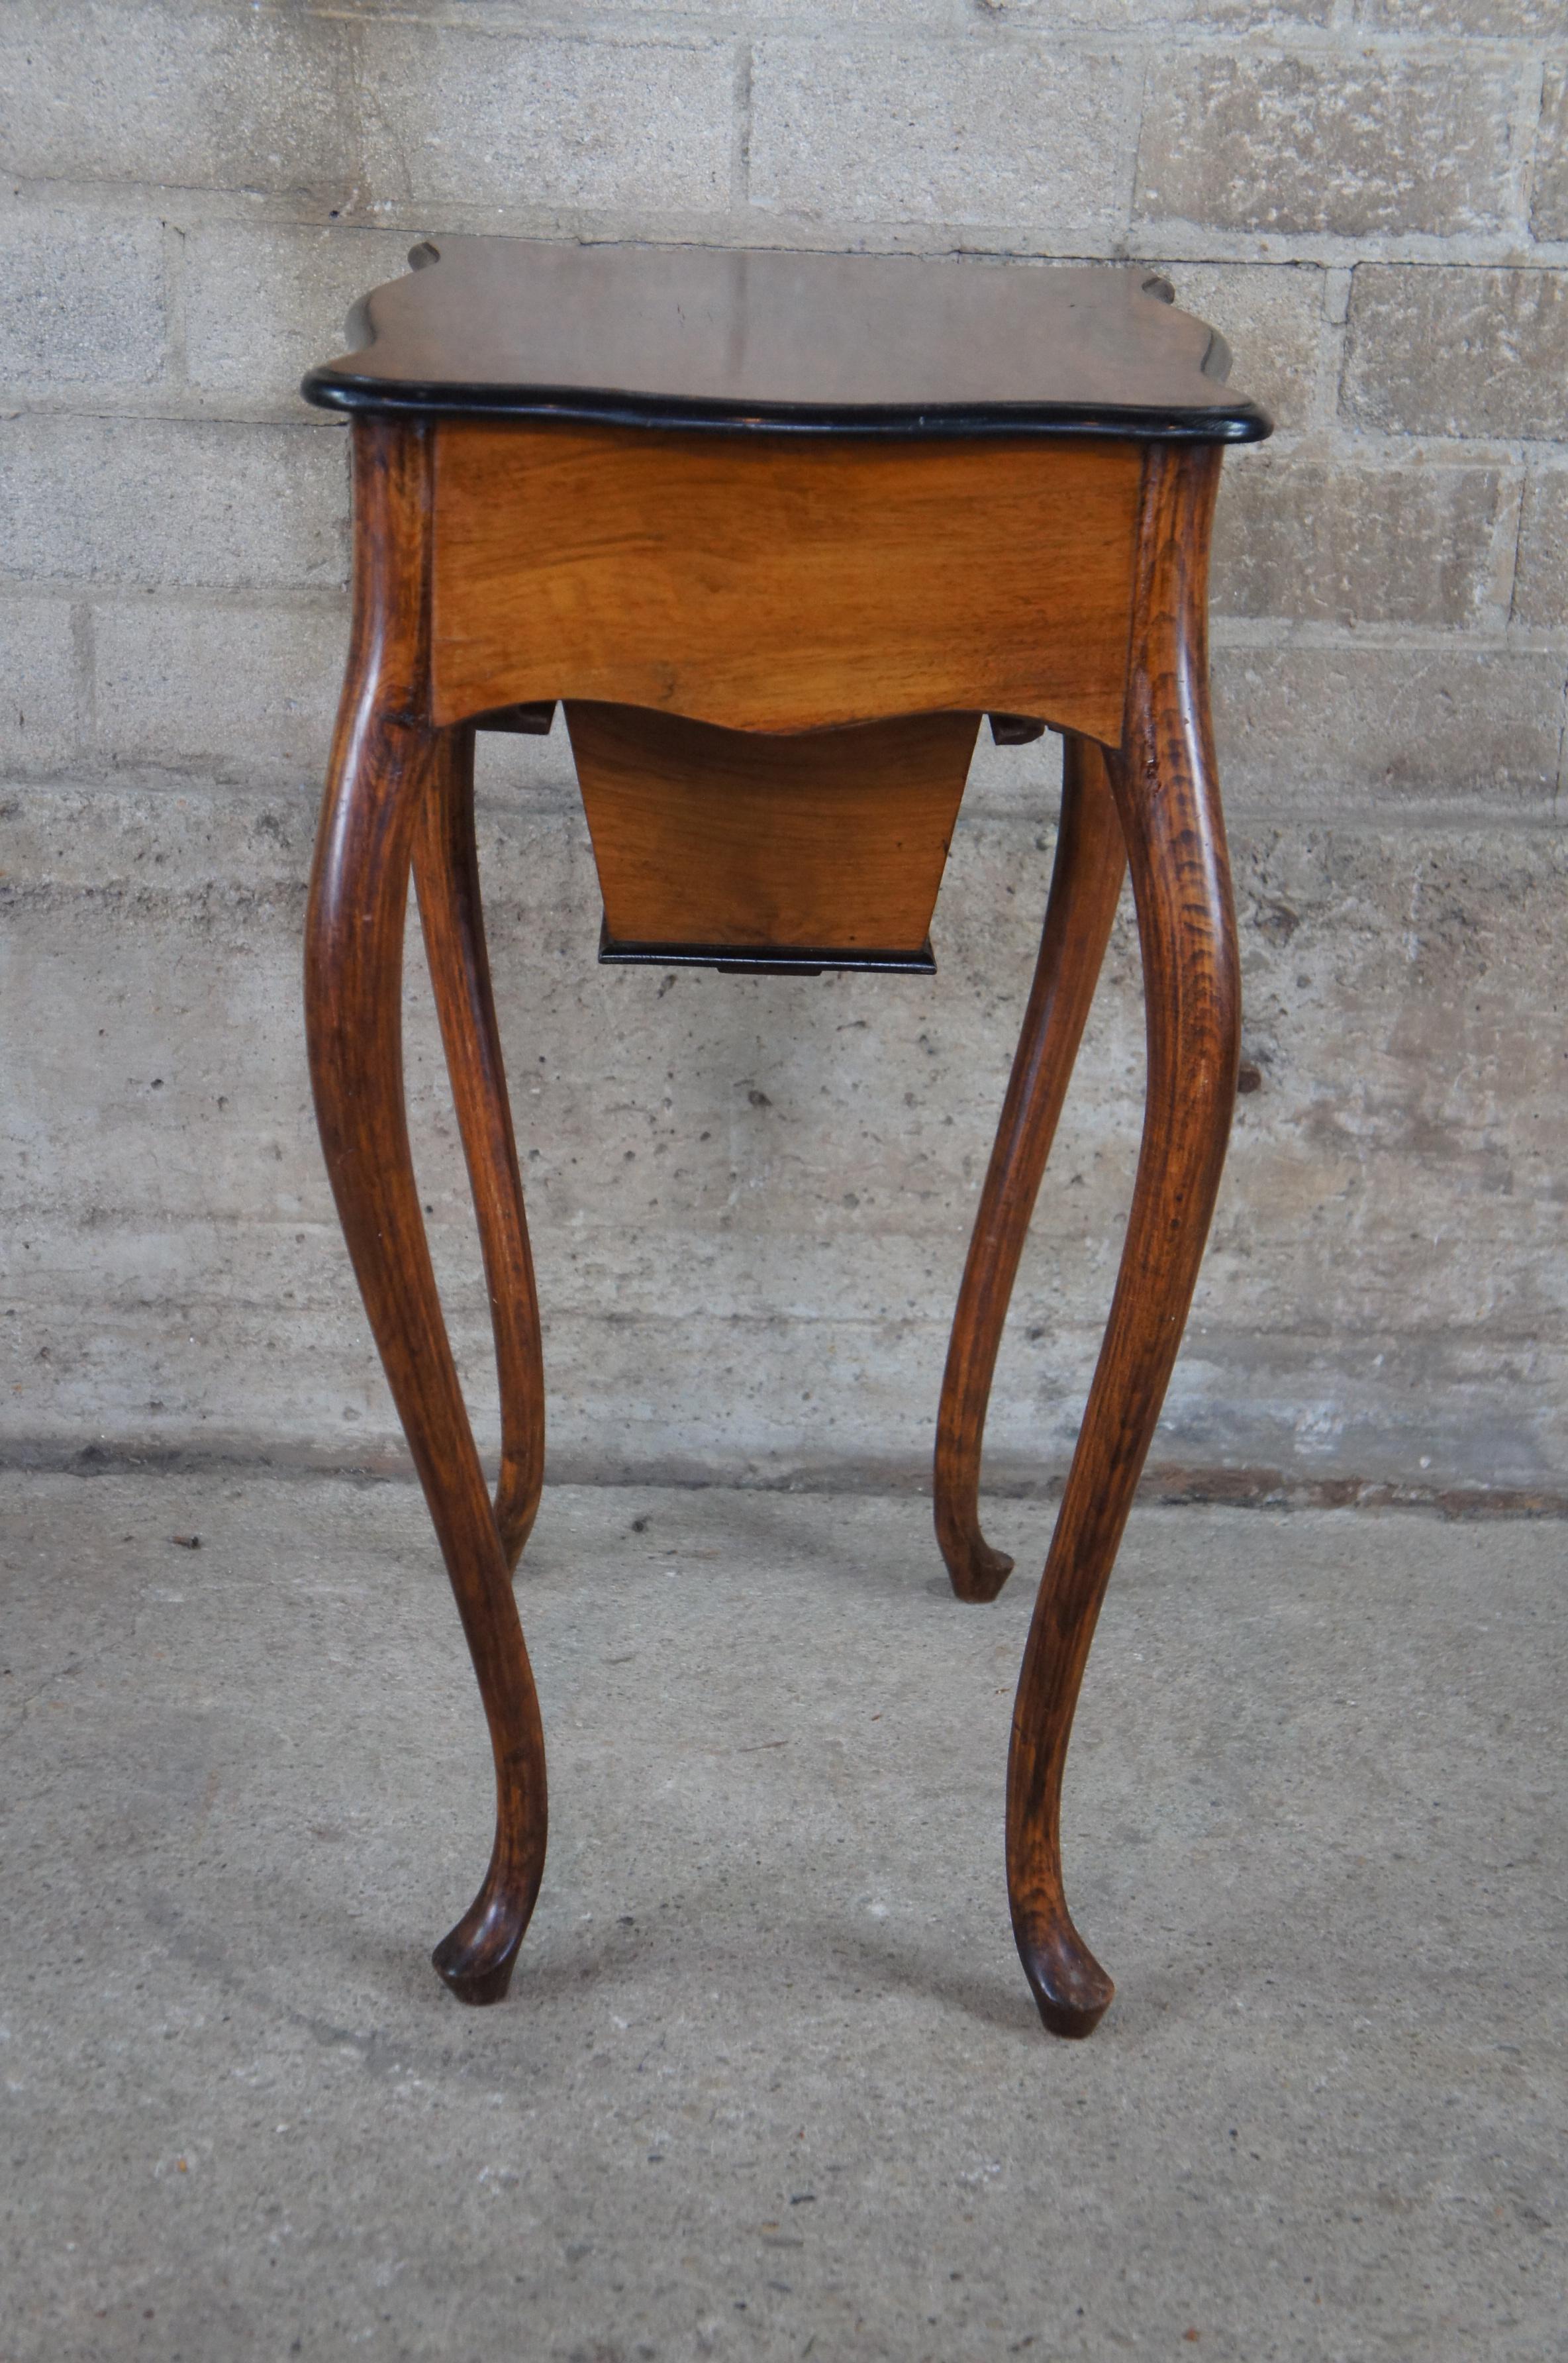 French Provincial Antique French Country Oak & Walnut Serpentine Sewing Cabinet Side Accent Table For Sale